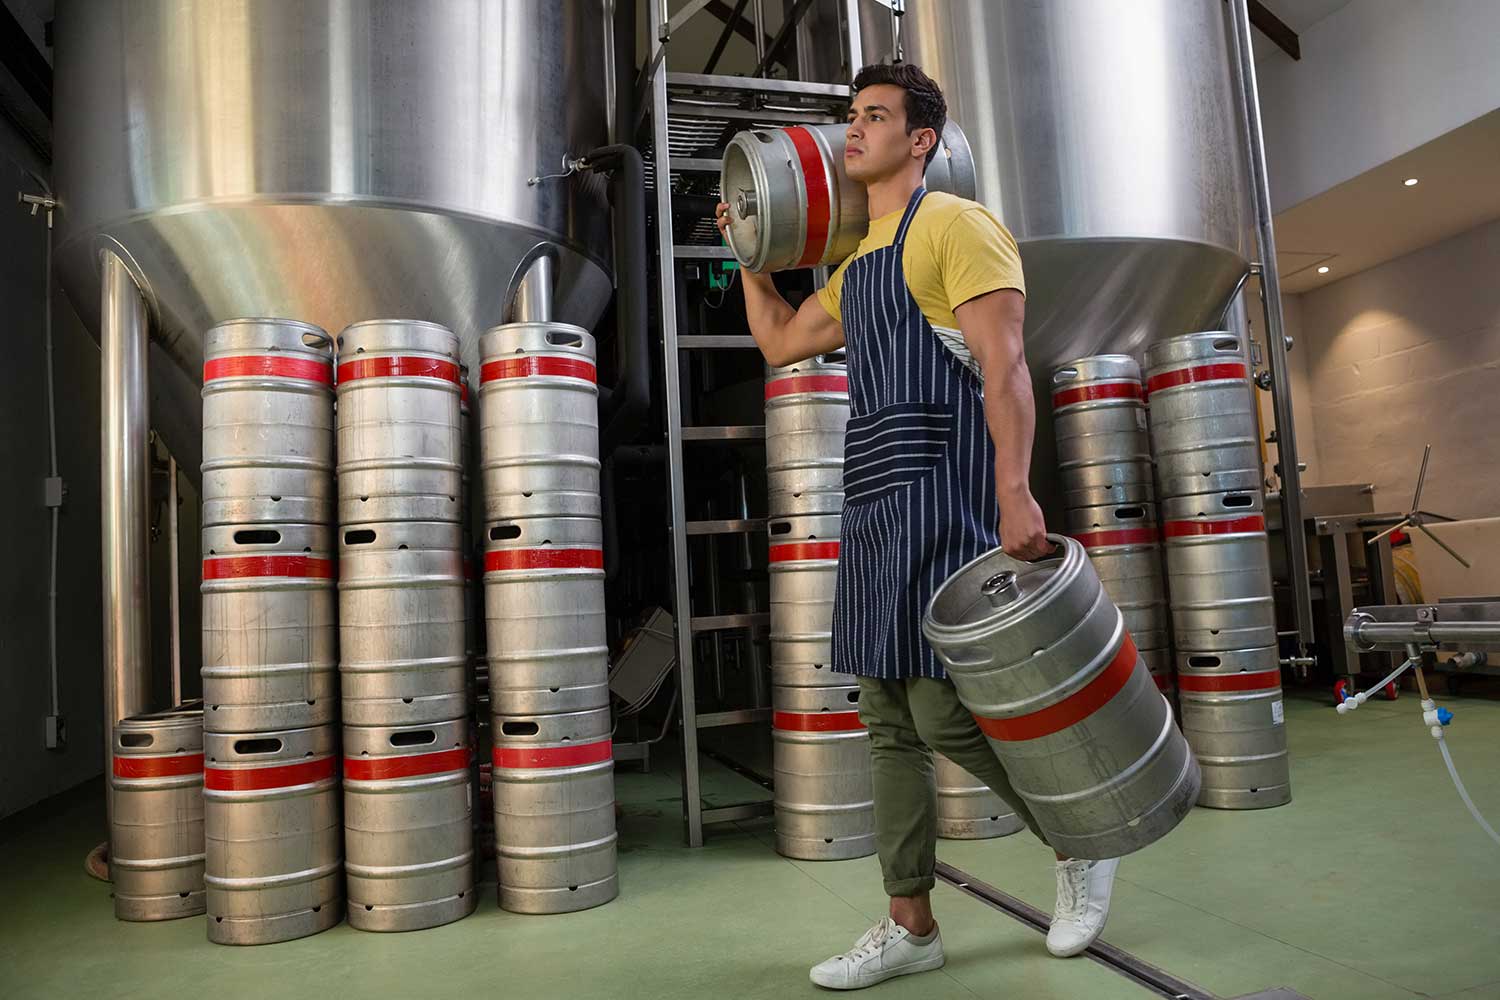 worker-with-kegs-walking-at-warehouse